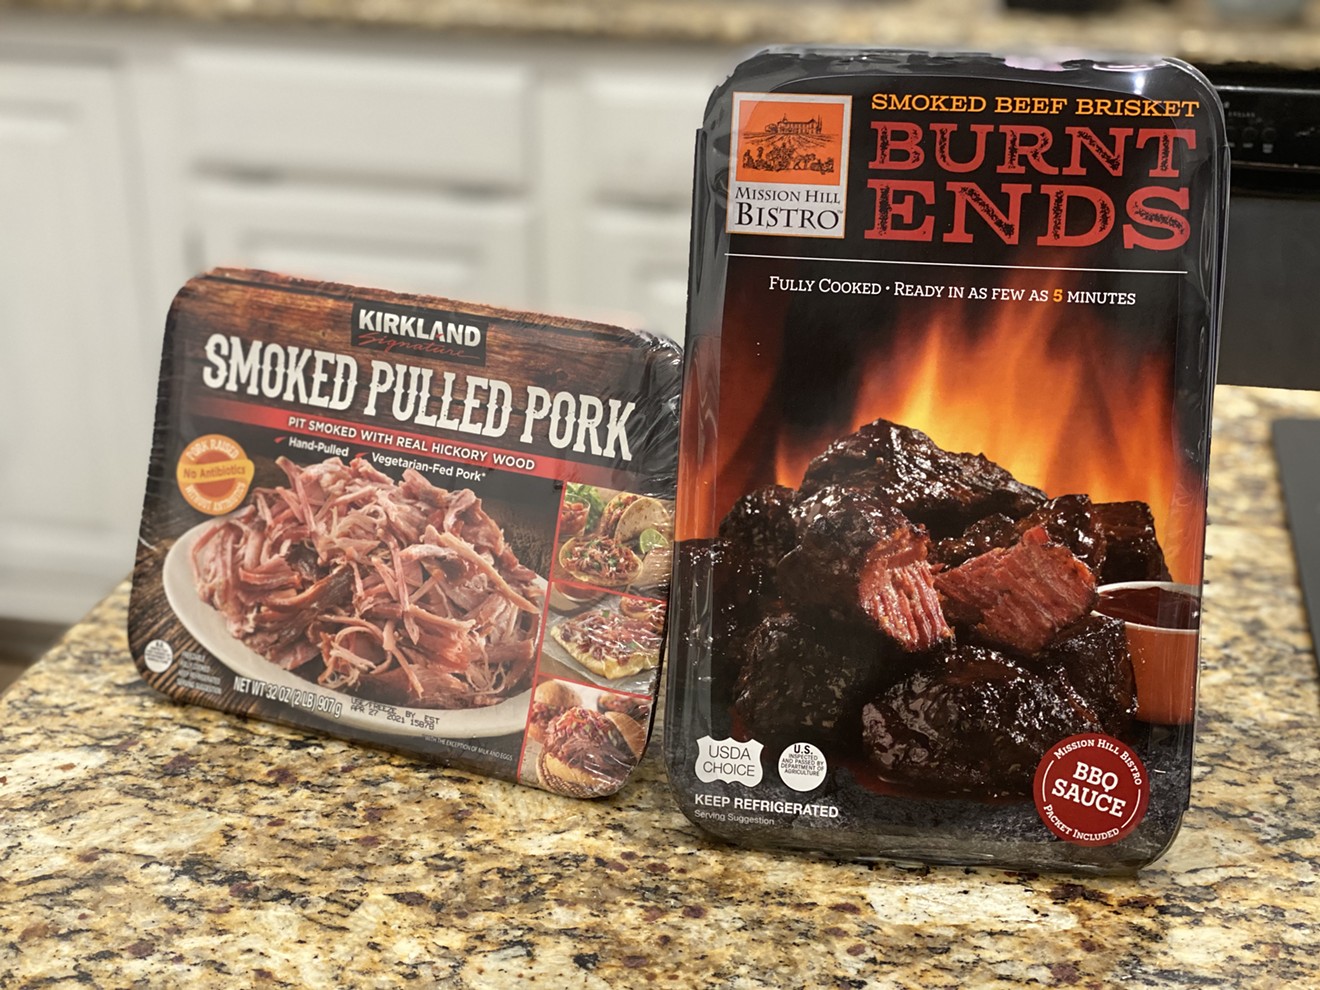 We can add barbecue to the wide variety of food and merchandise you can buy at your local Costco.